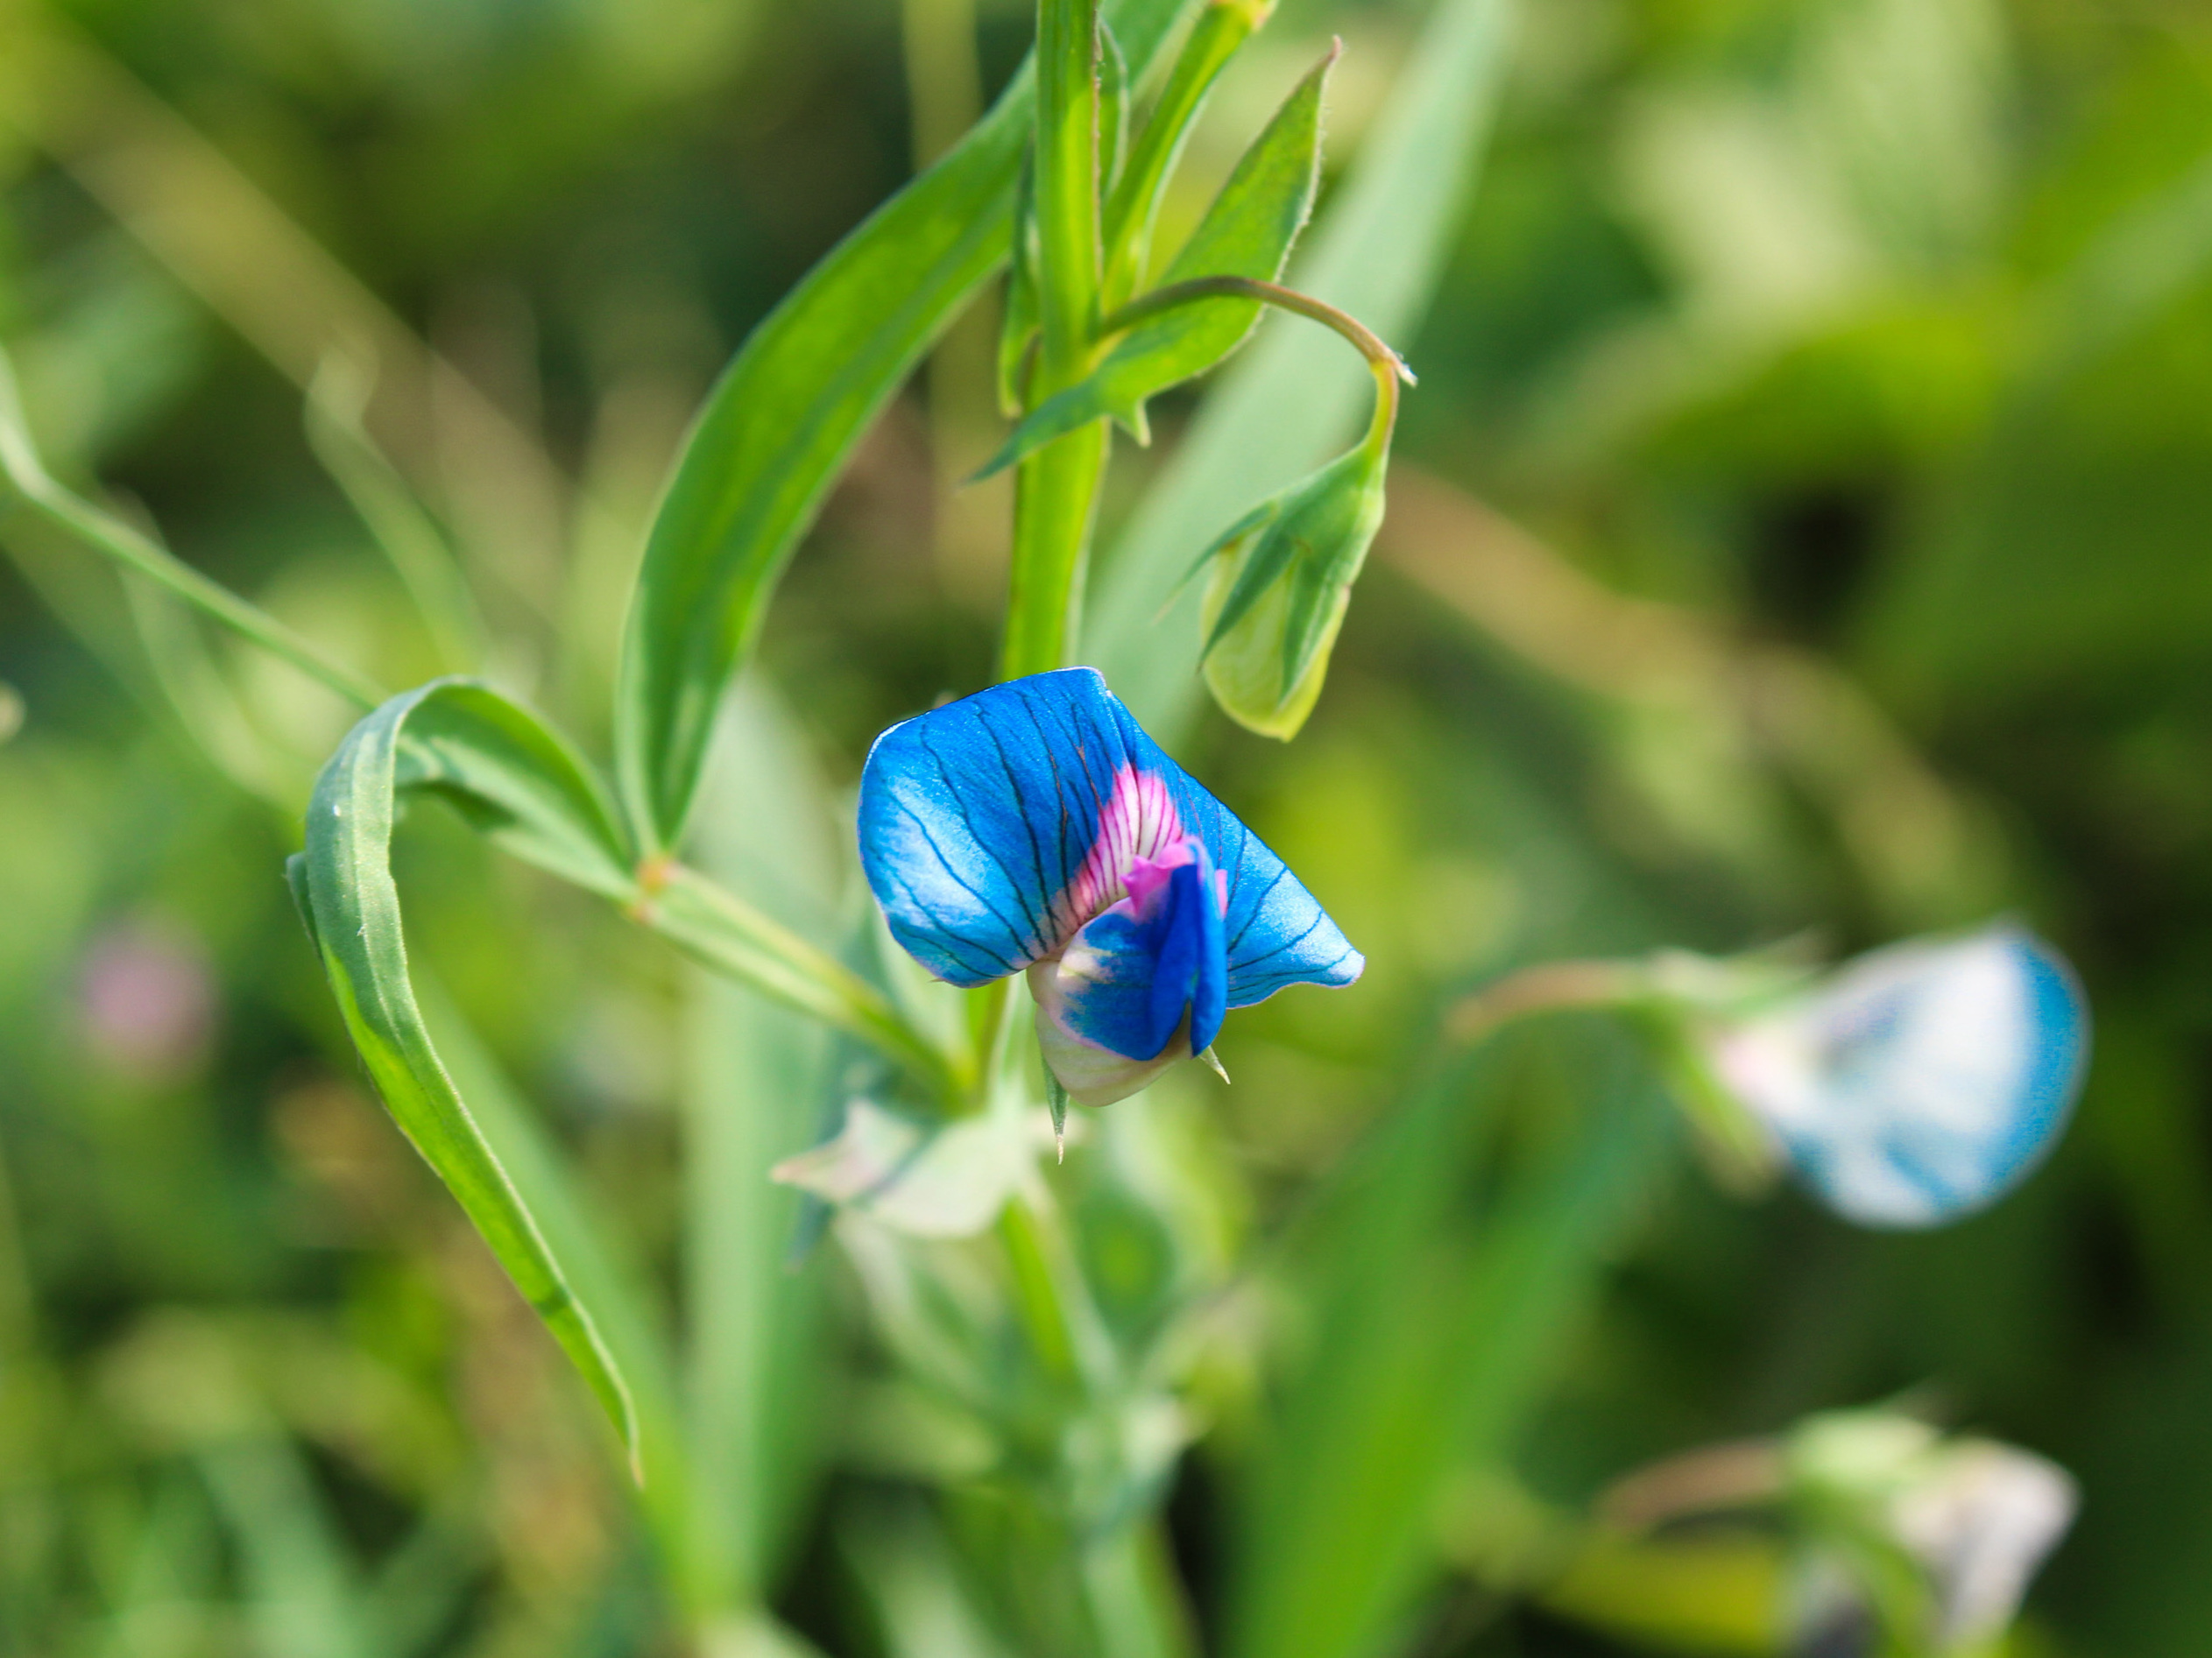 The grass pea — Lathyrus sativus — is hardy and drought resistant. It takes like a sugar snap pea, delicious, although if that's all you were to eat its natural toxin could make you sick. But breeders might be able to address that issue.